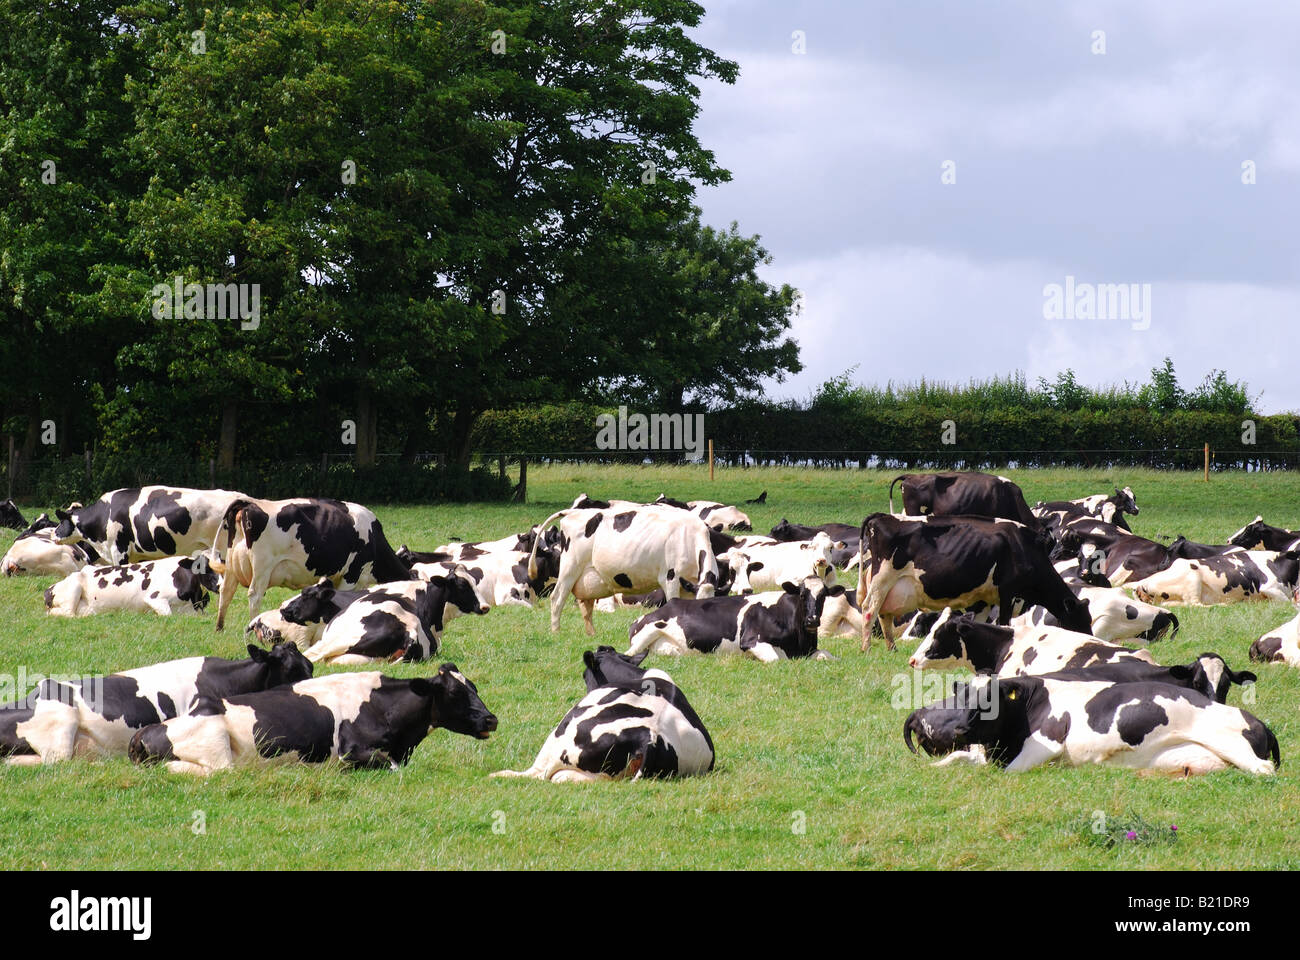 Friesian dairy cows in field, Hampshire, England, United Kingdom Stock Photo